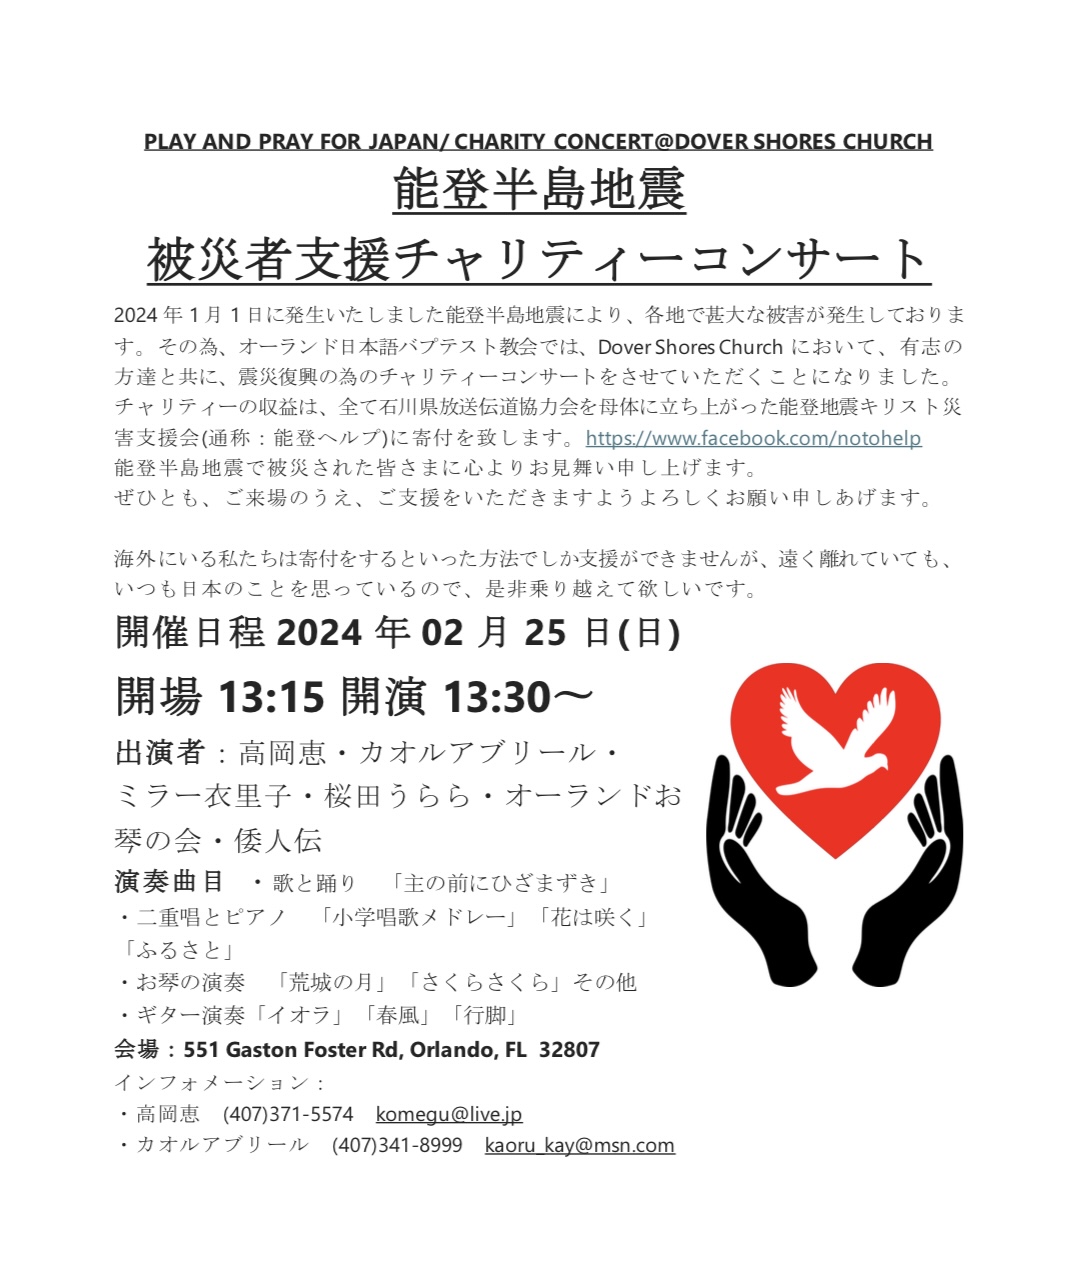 Benefit concert to support victims of the Noto Peninsula earthquake in Japan